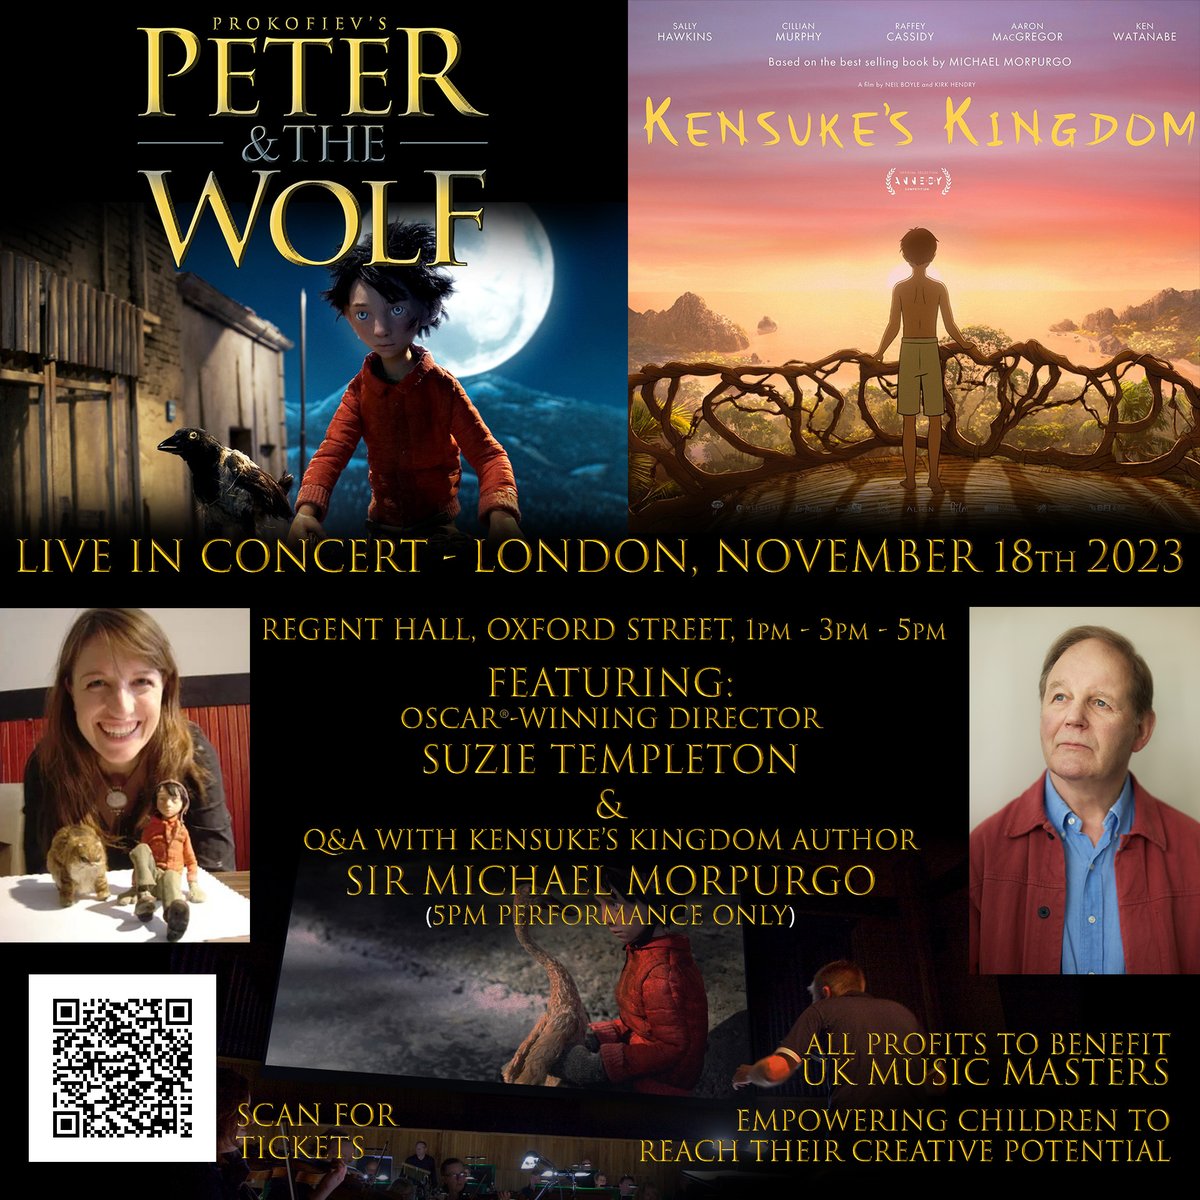 💥3pm show SOLD OUT💥PETER & THE WOLF LIVE IN CONCERT Grab your tickets for the 1pm /5pm @RegentHallSA Sat Nov 18: eventbrite.com/.../peter-the-…... with the bonus of a Michael Morpurgo Q+A for the KENSUKE'S KINGDOM movie (5pm show only) @stpaulssinfonia @UKMusicMasters @LupusFilms